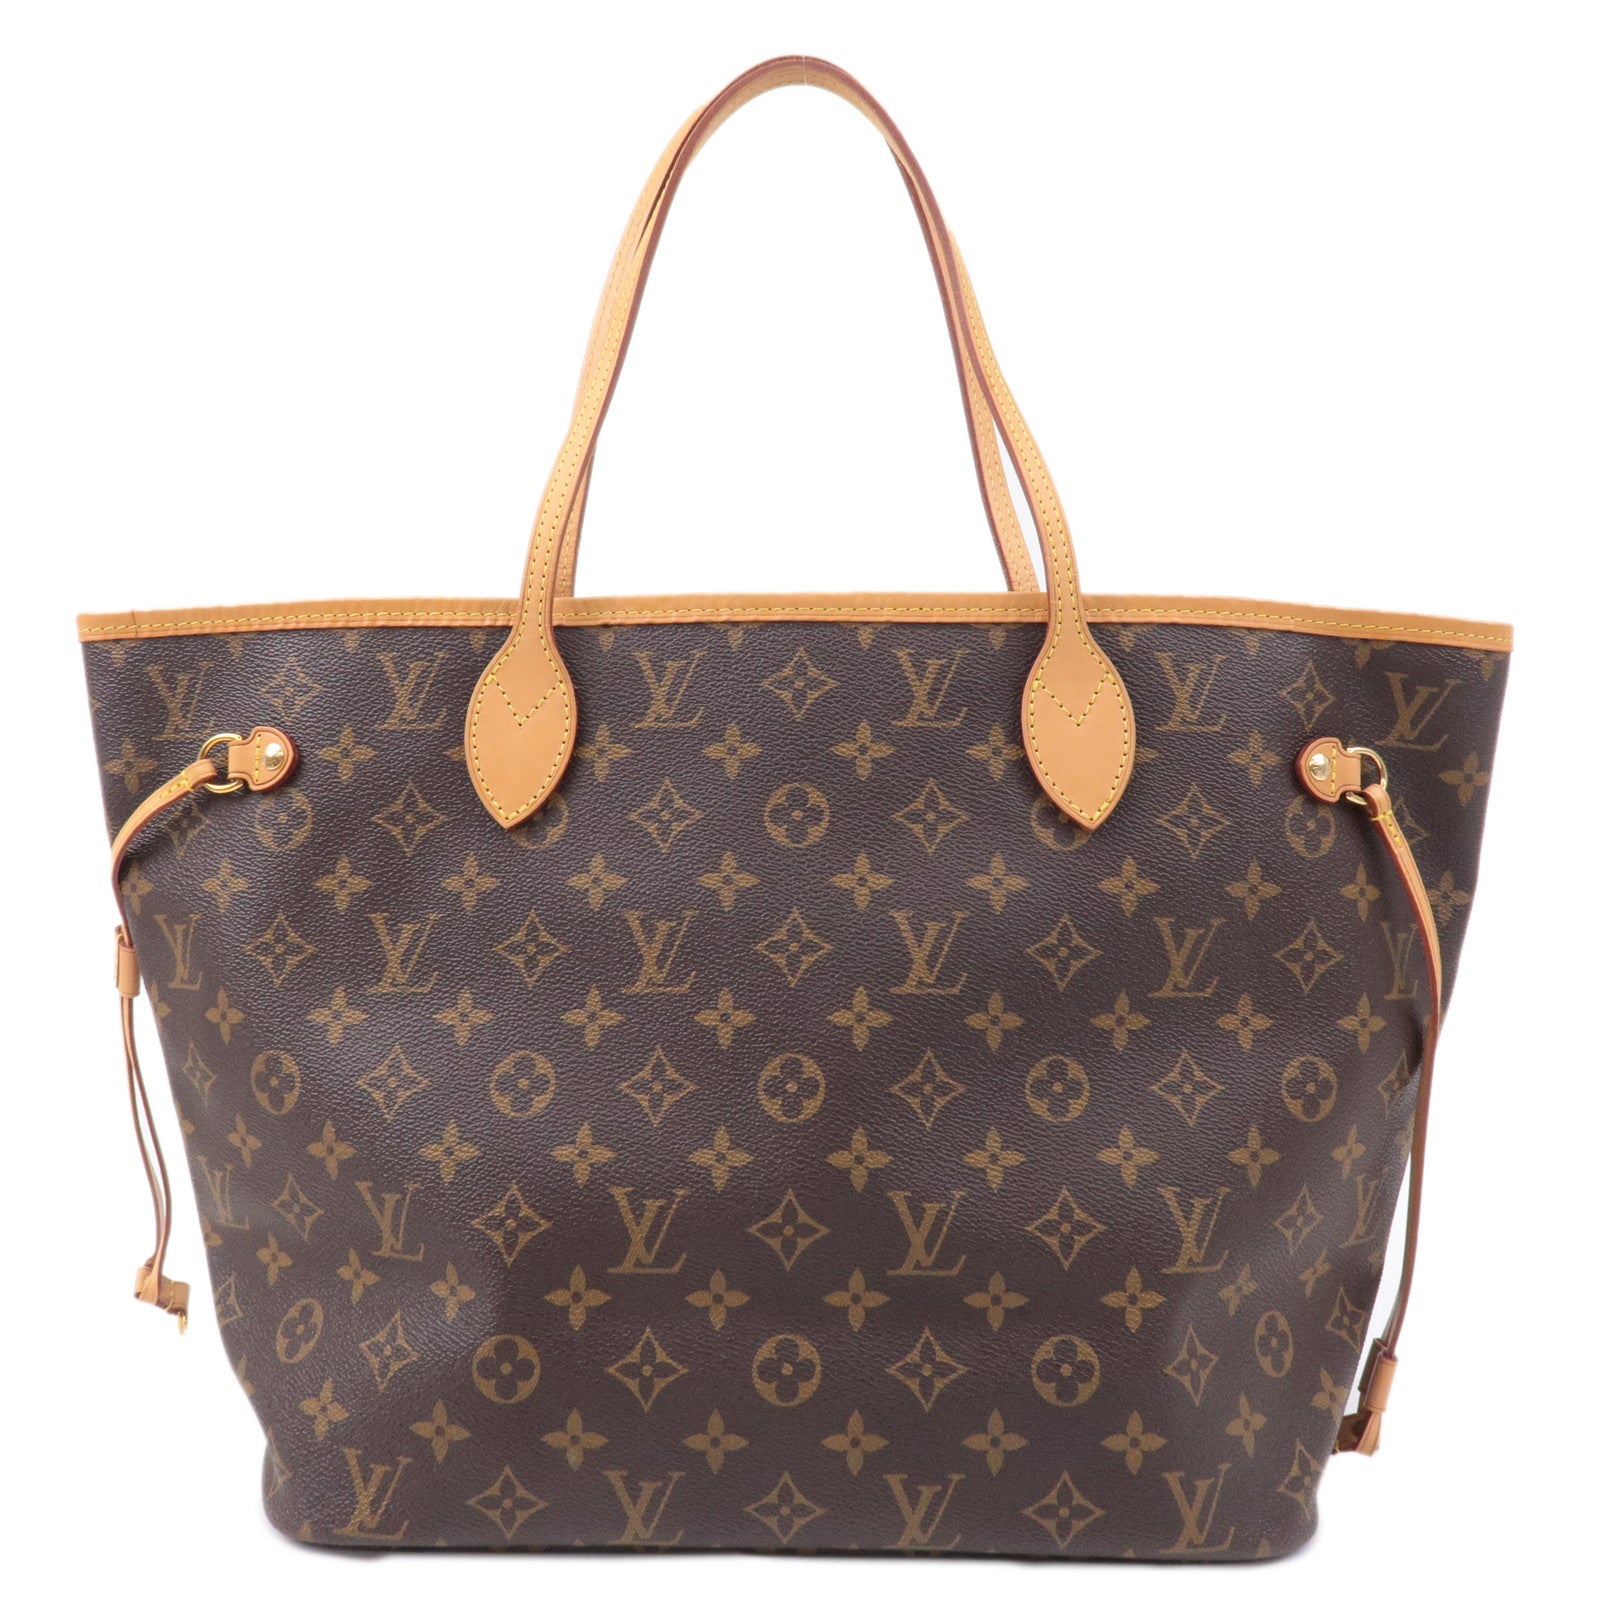 Louis Vuitton Monogram Neverfull MM Used condition 7/10 Selling at